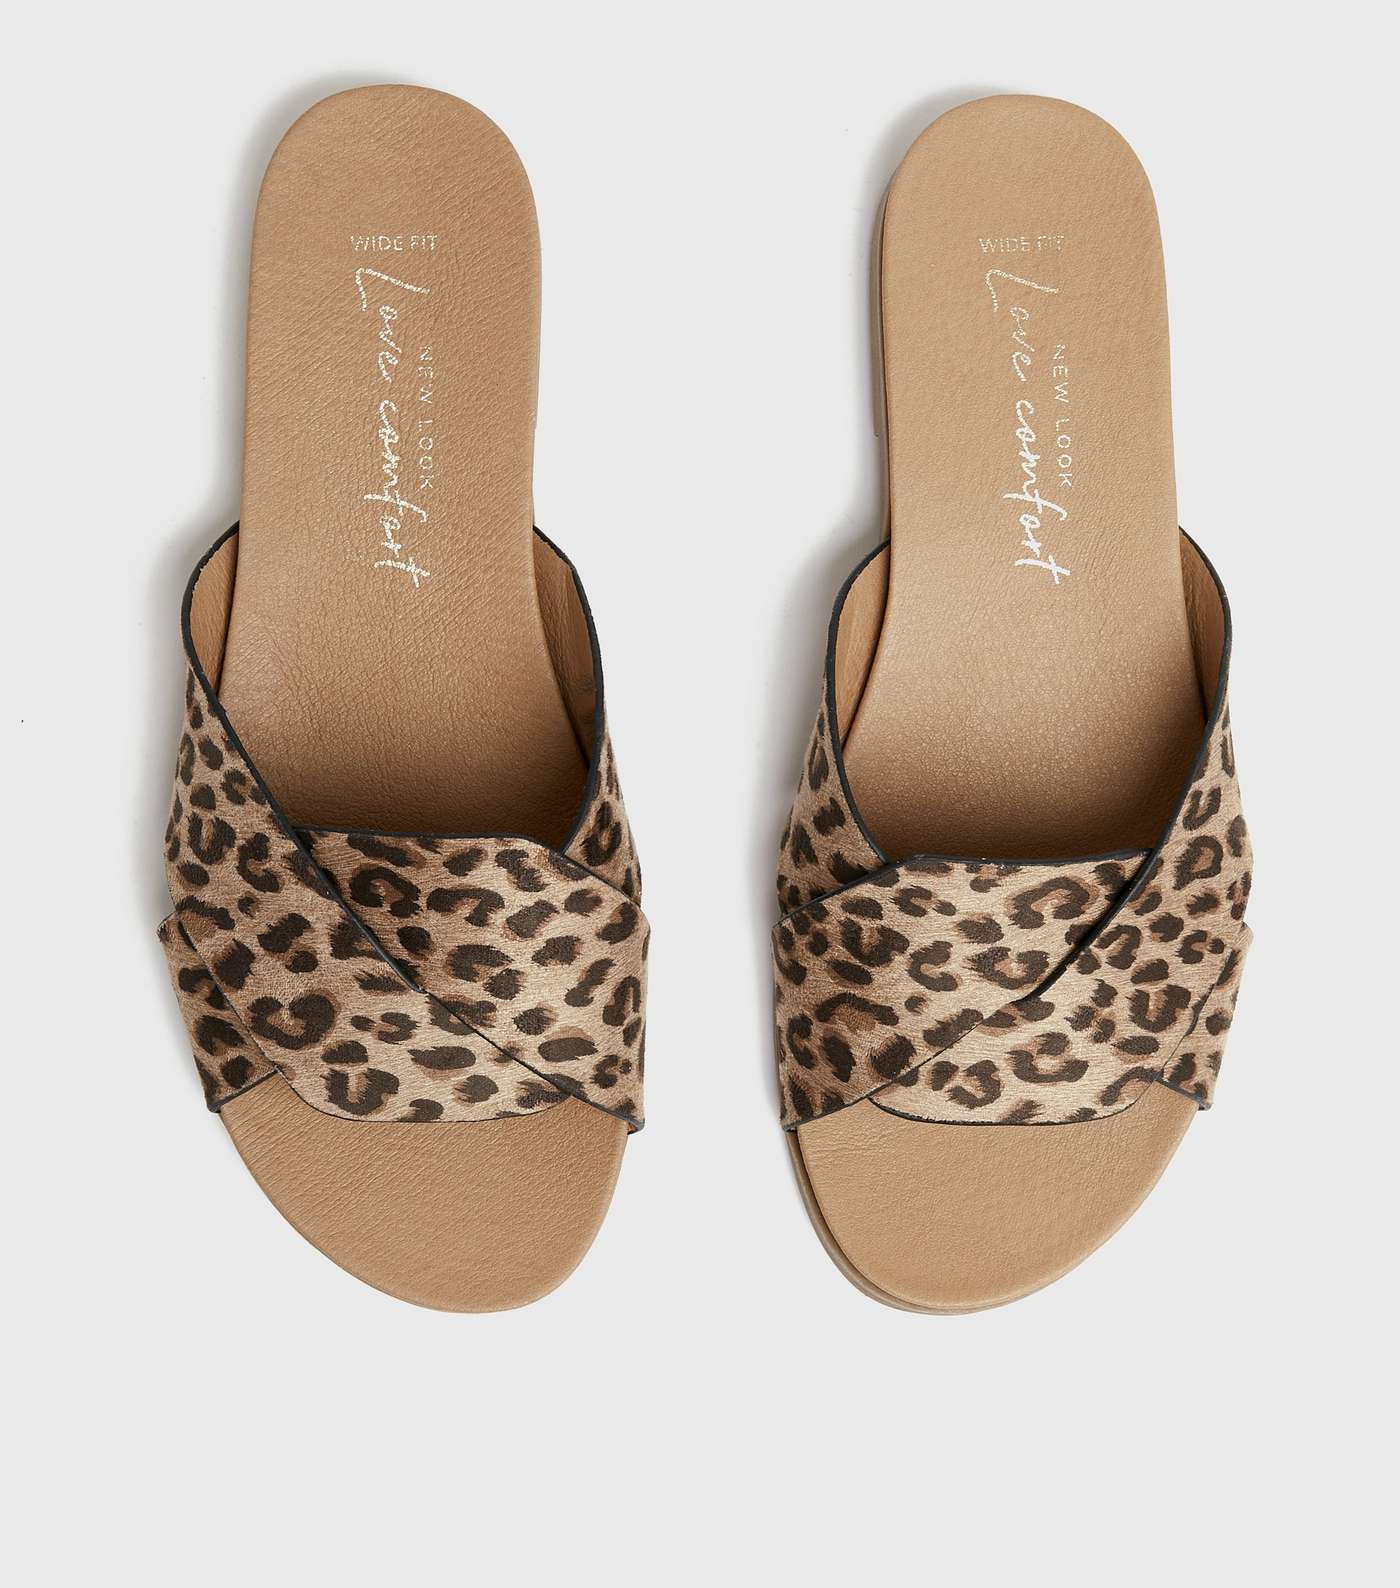 Wide Fit Stone Leopard Print Strap Footbed Sliders